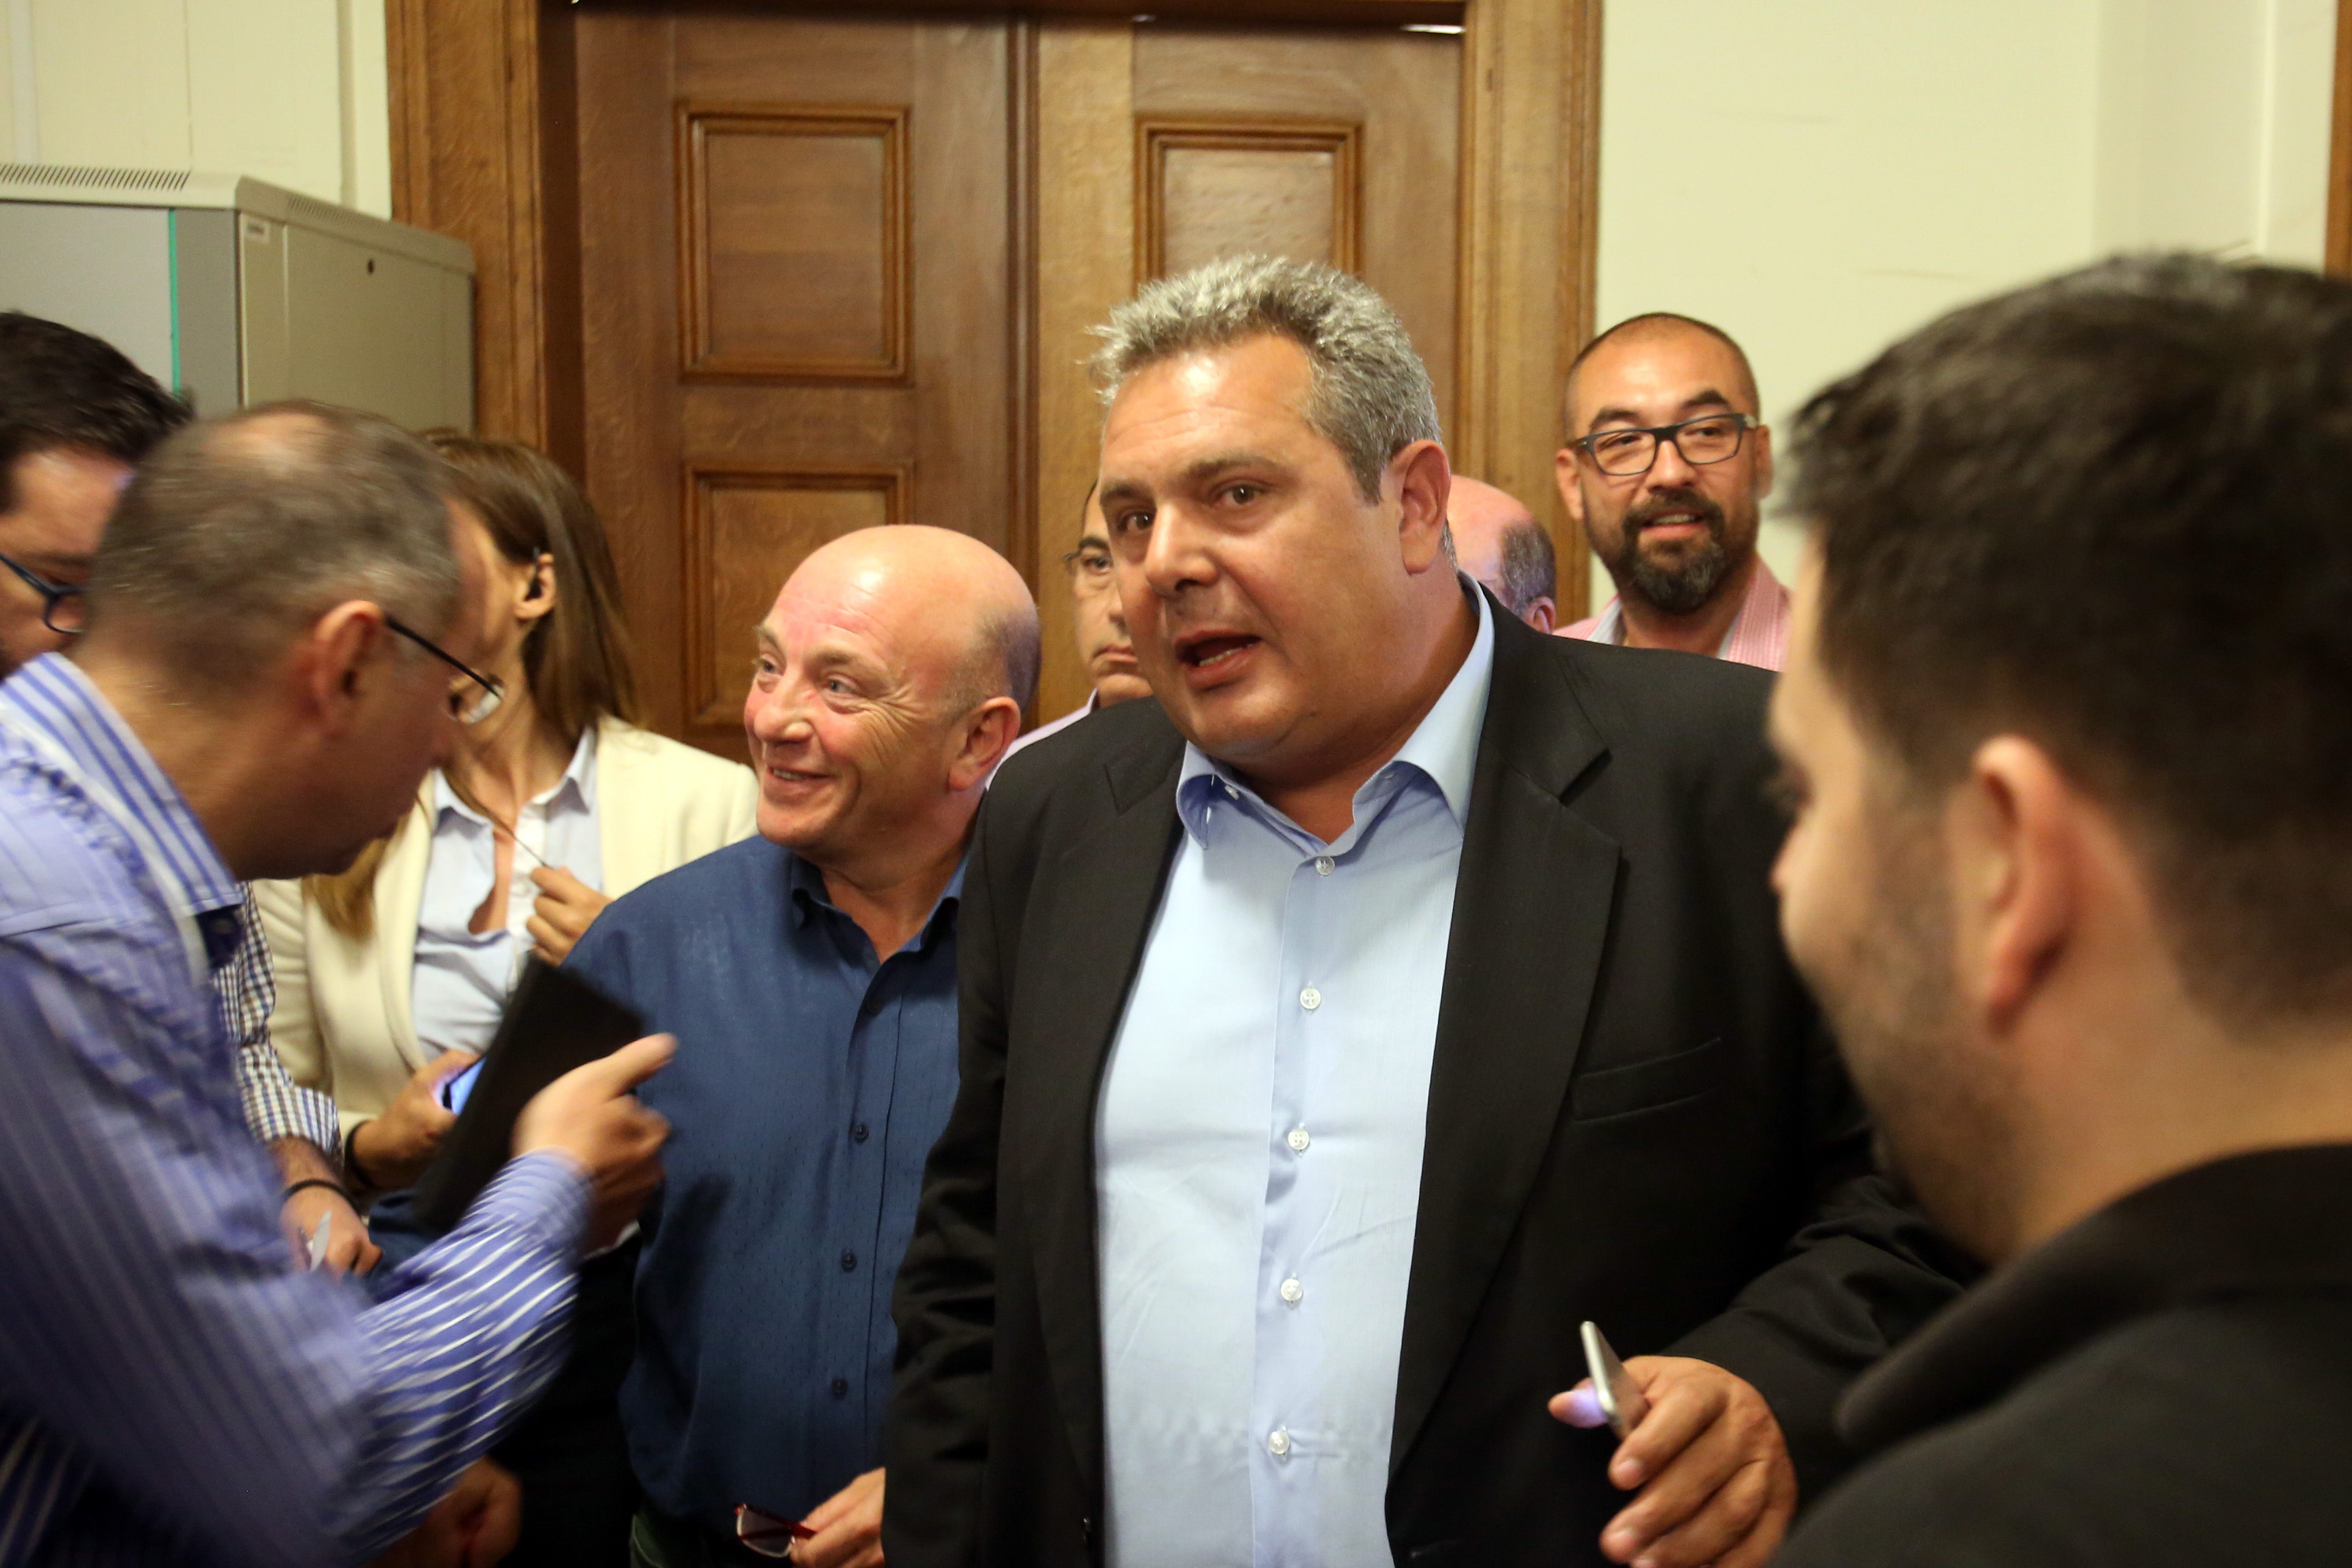 Kammenos demands 180 MP majority on FYROM accord, but he will vote down